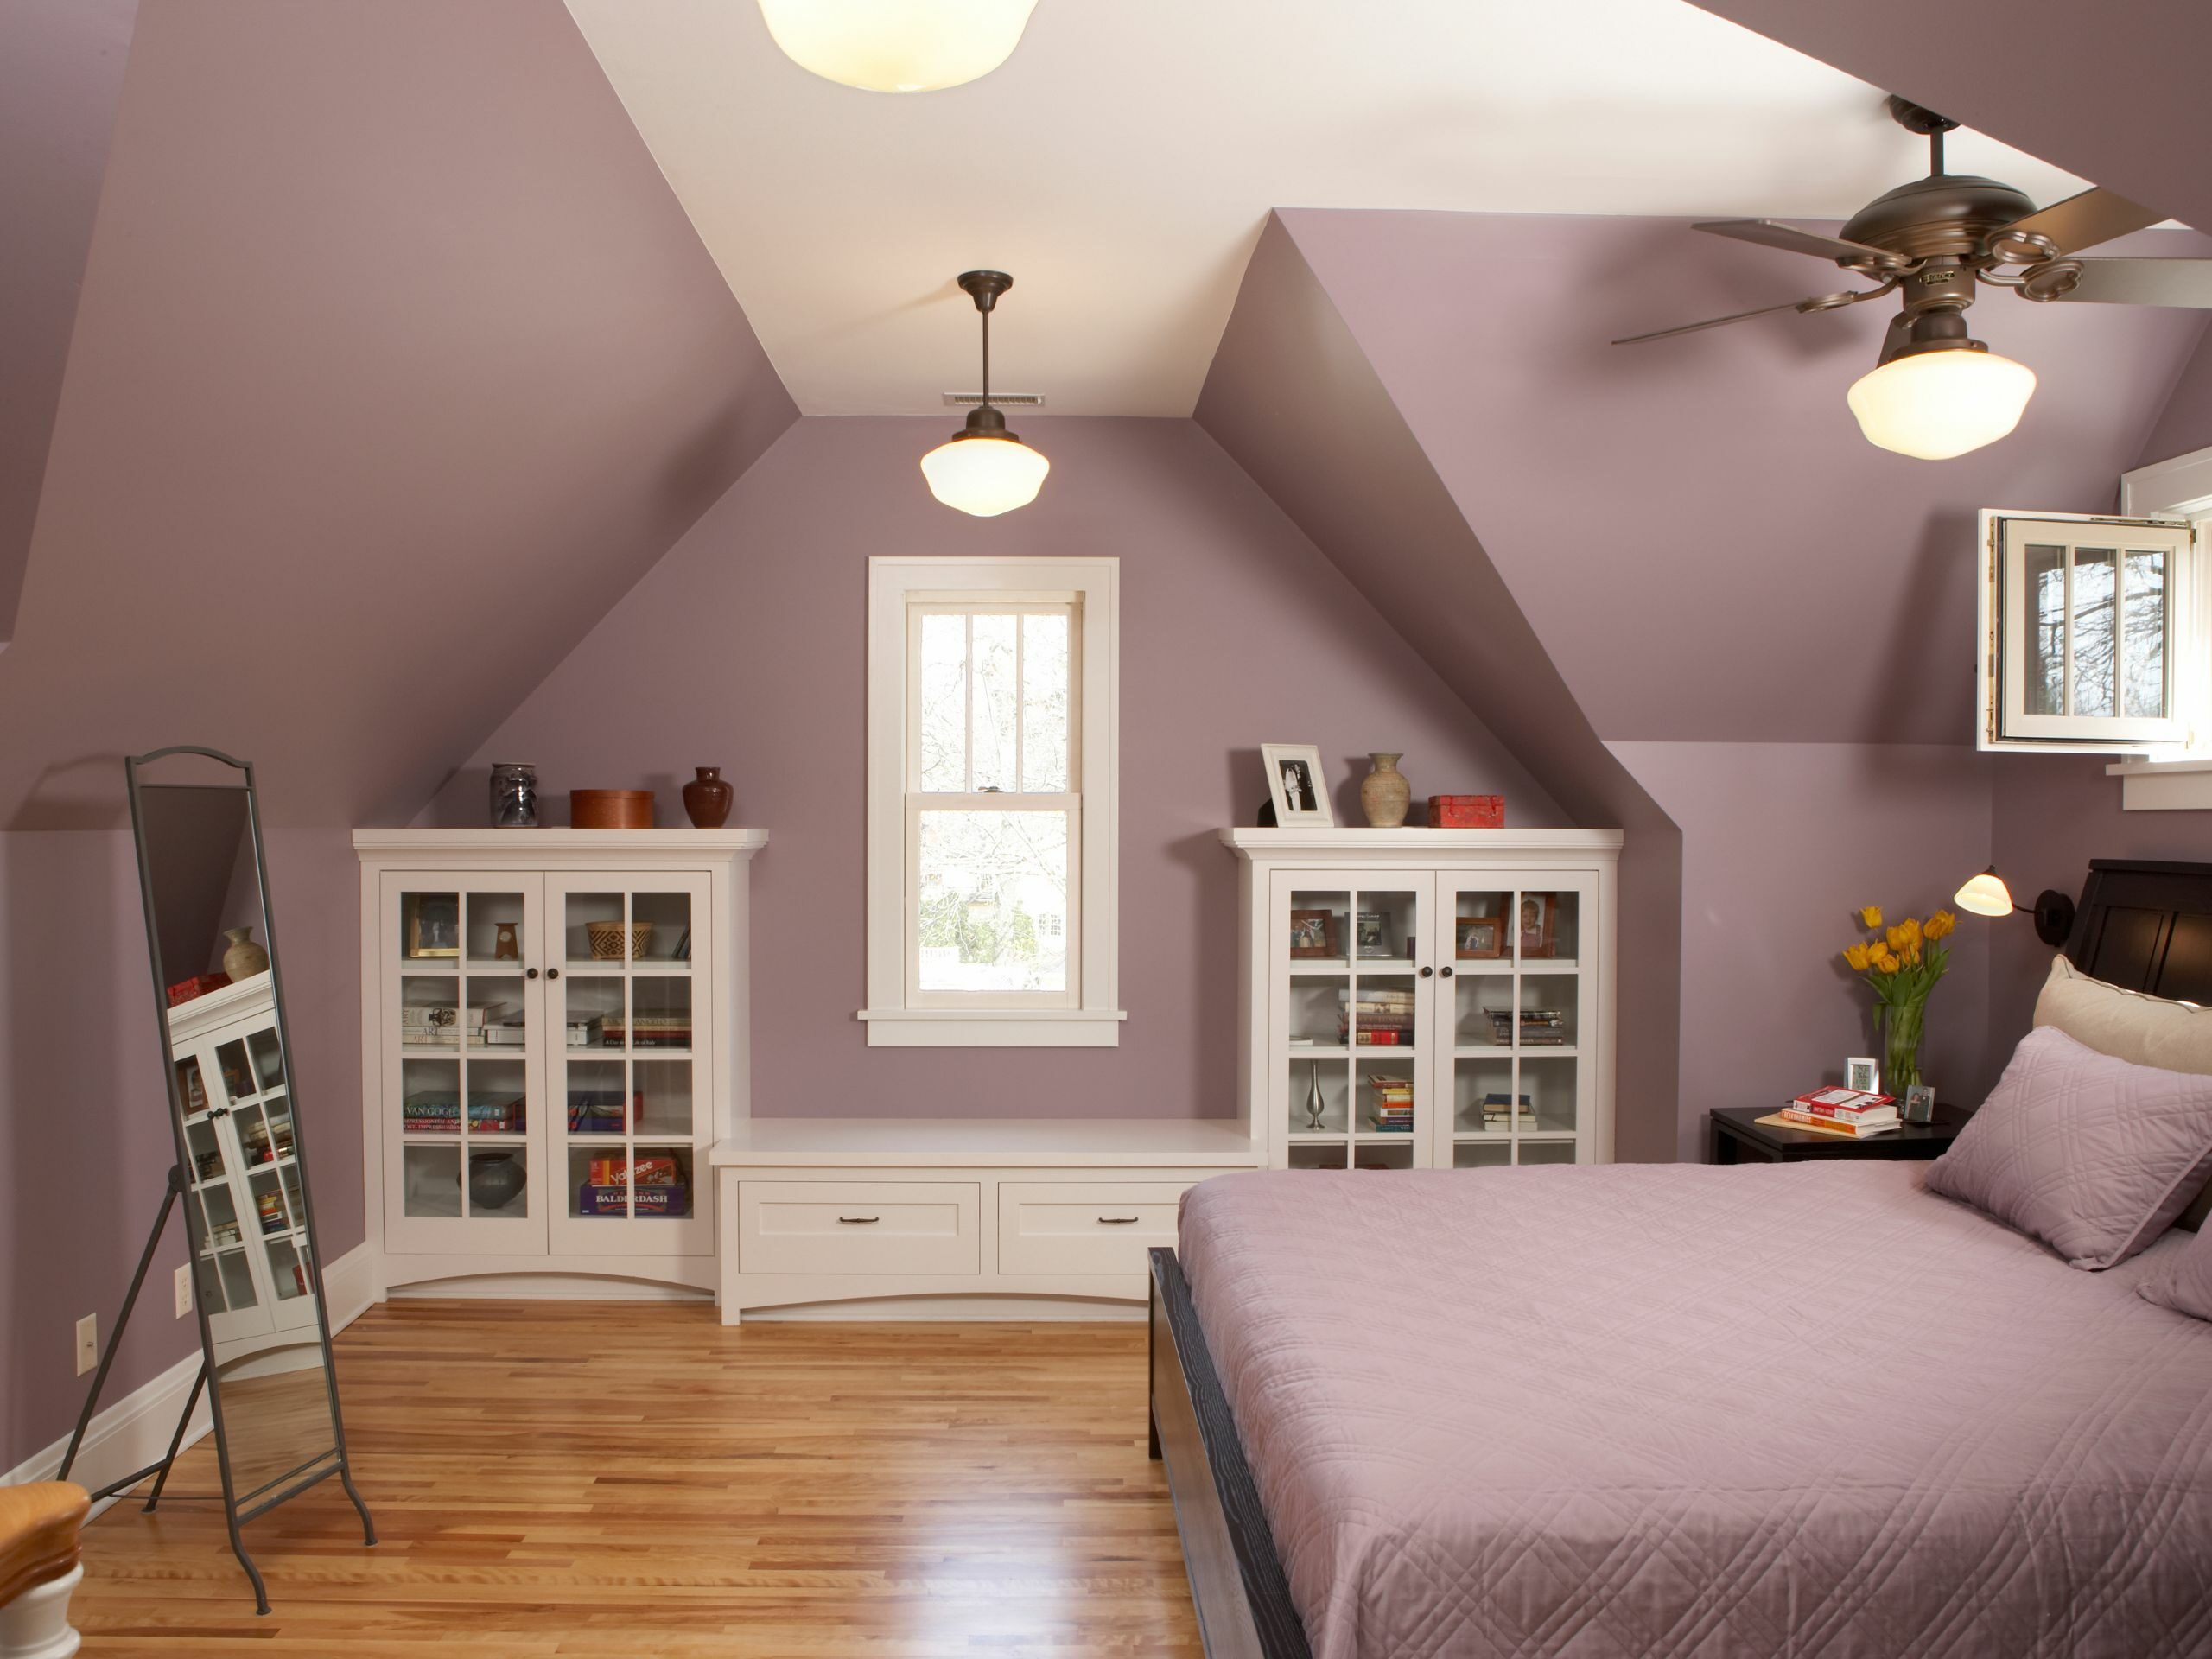 finishing the attic space is a home addition ideas to increase your square footage